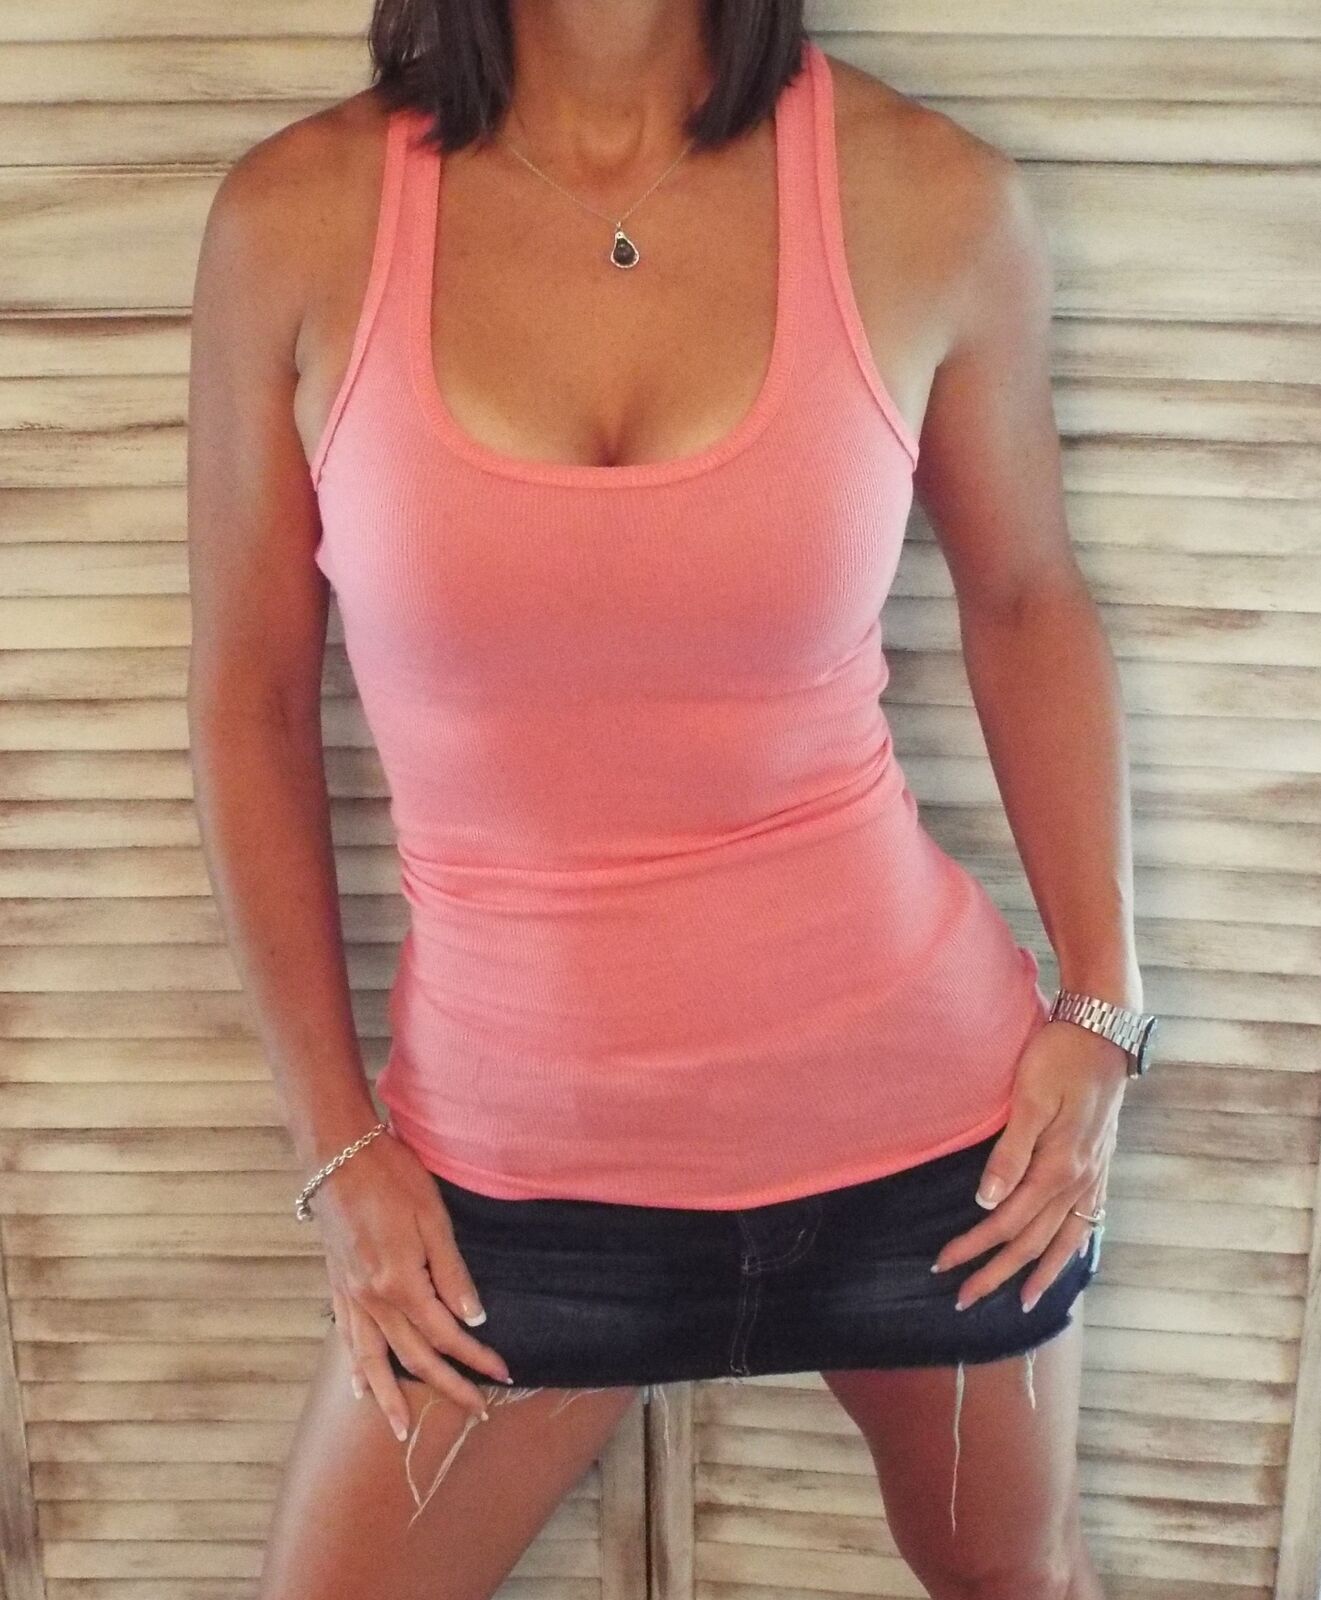 "Can't Touch This" Ribbed Racerback Low Scoop Boy Beater Cleavage Tank Top Coral 1X/2X/3X